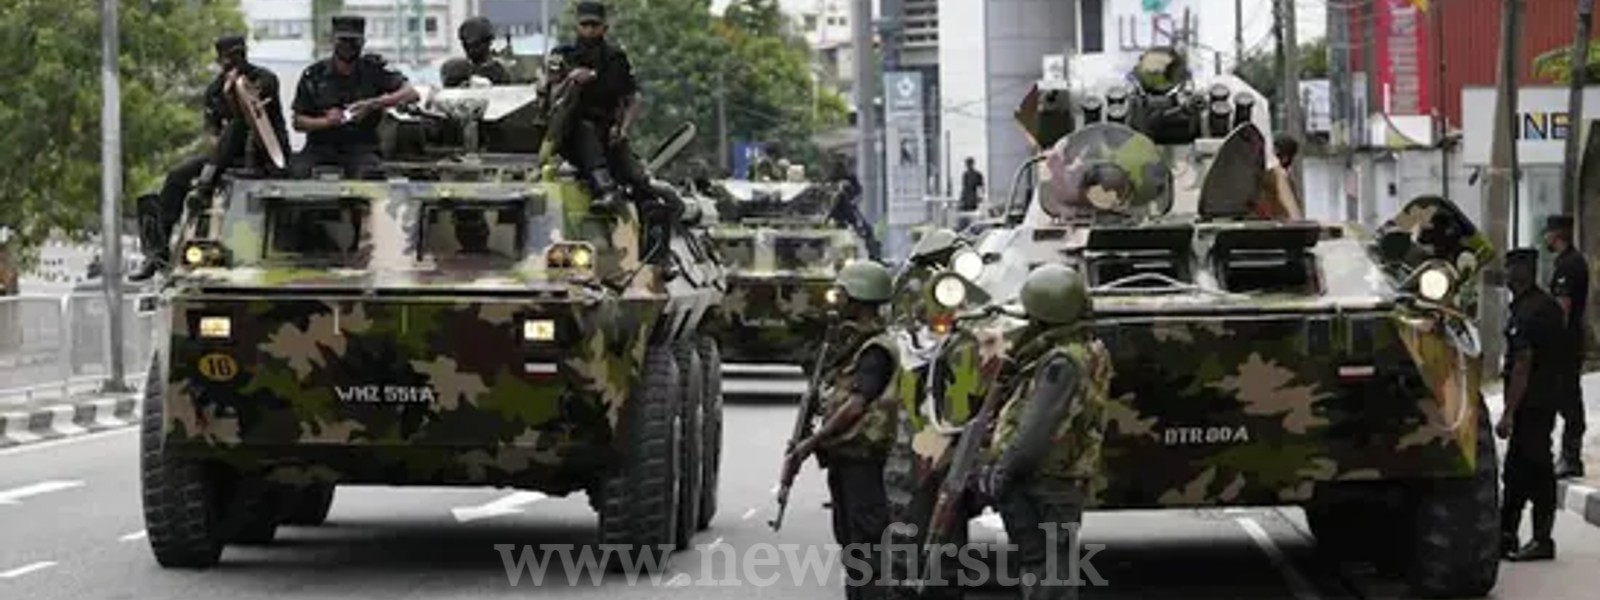 Sri Lanka: President calls Armed Forces to maintain public order